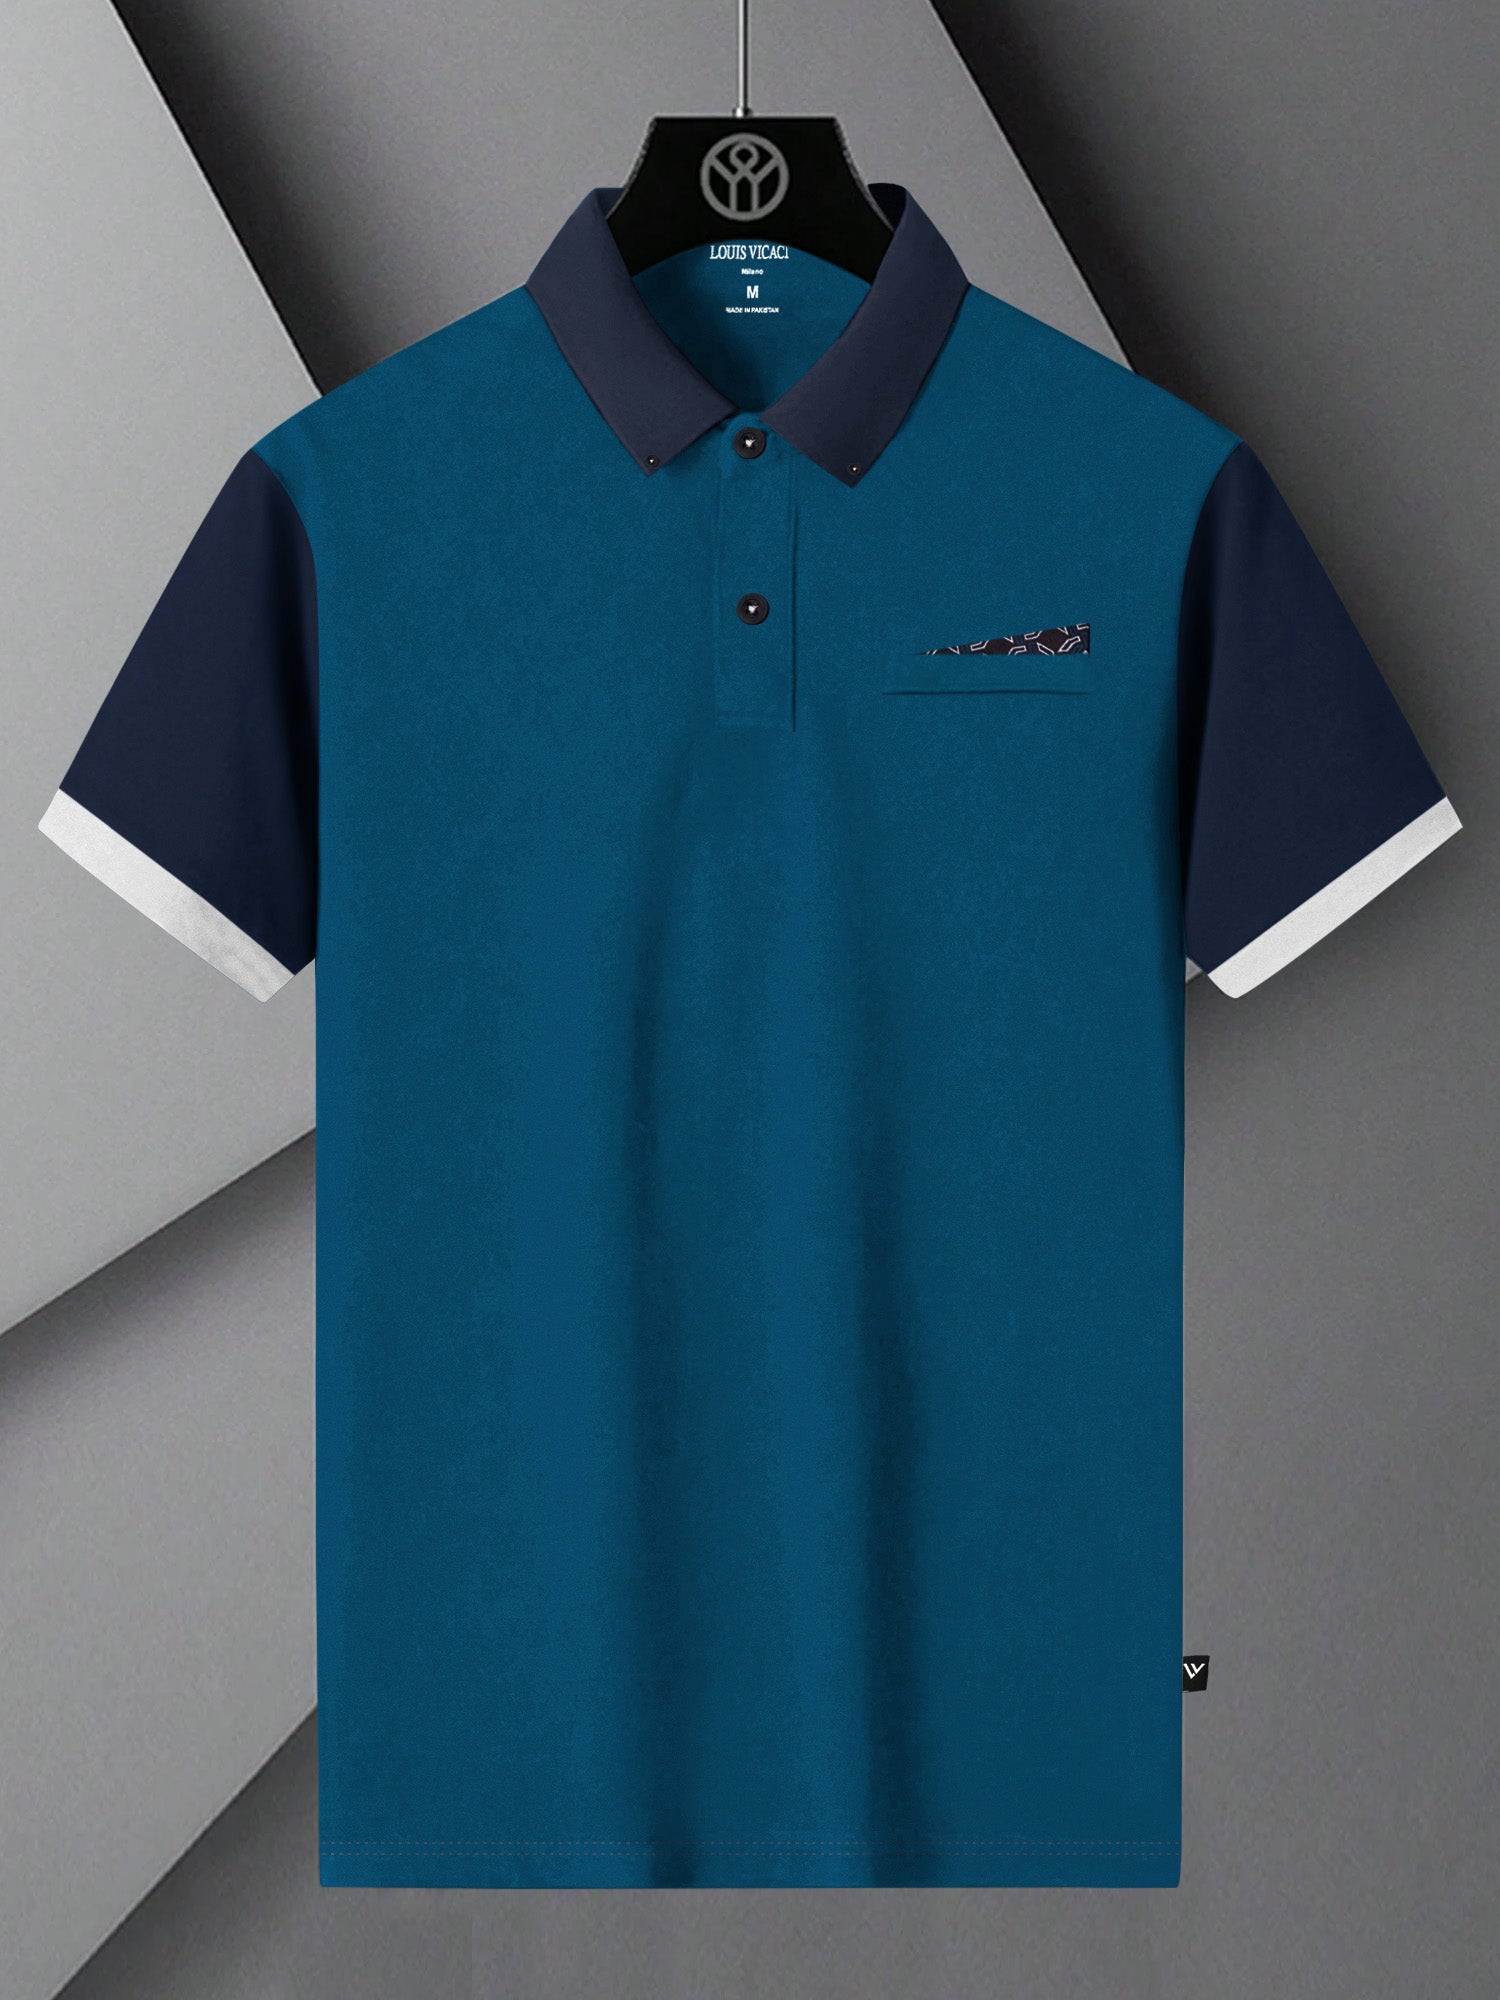 LV Summer Polo Shirt For Men-Dark Cyan Blue with Navy-BE715